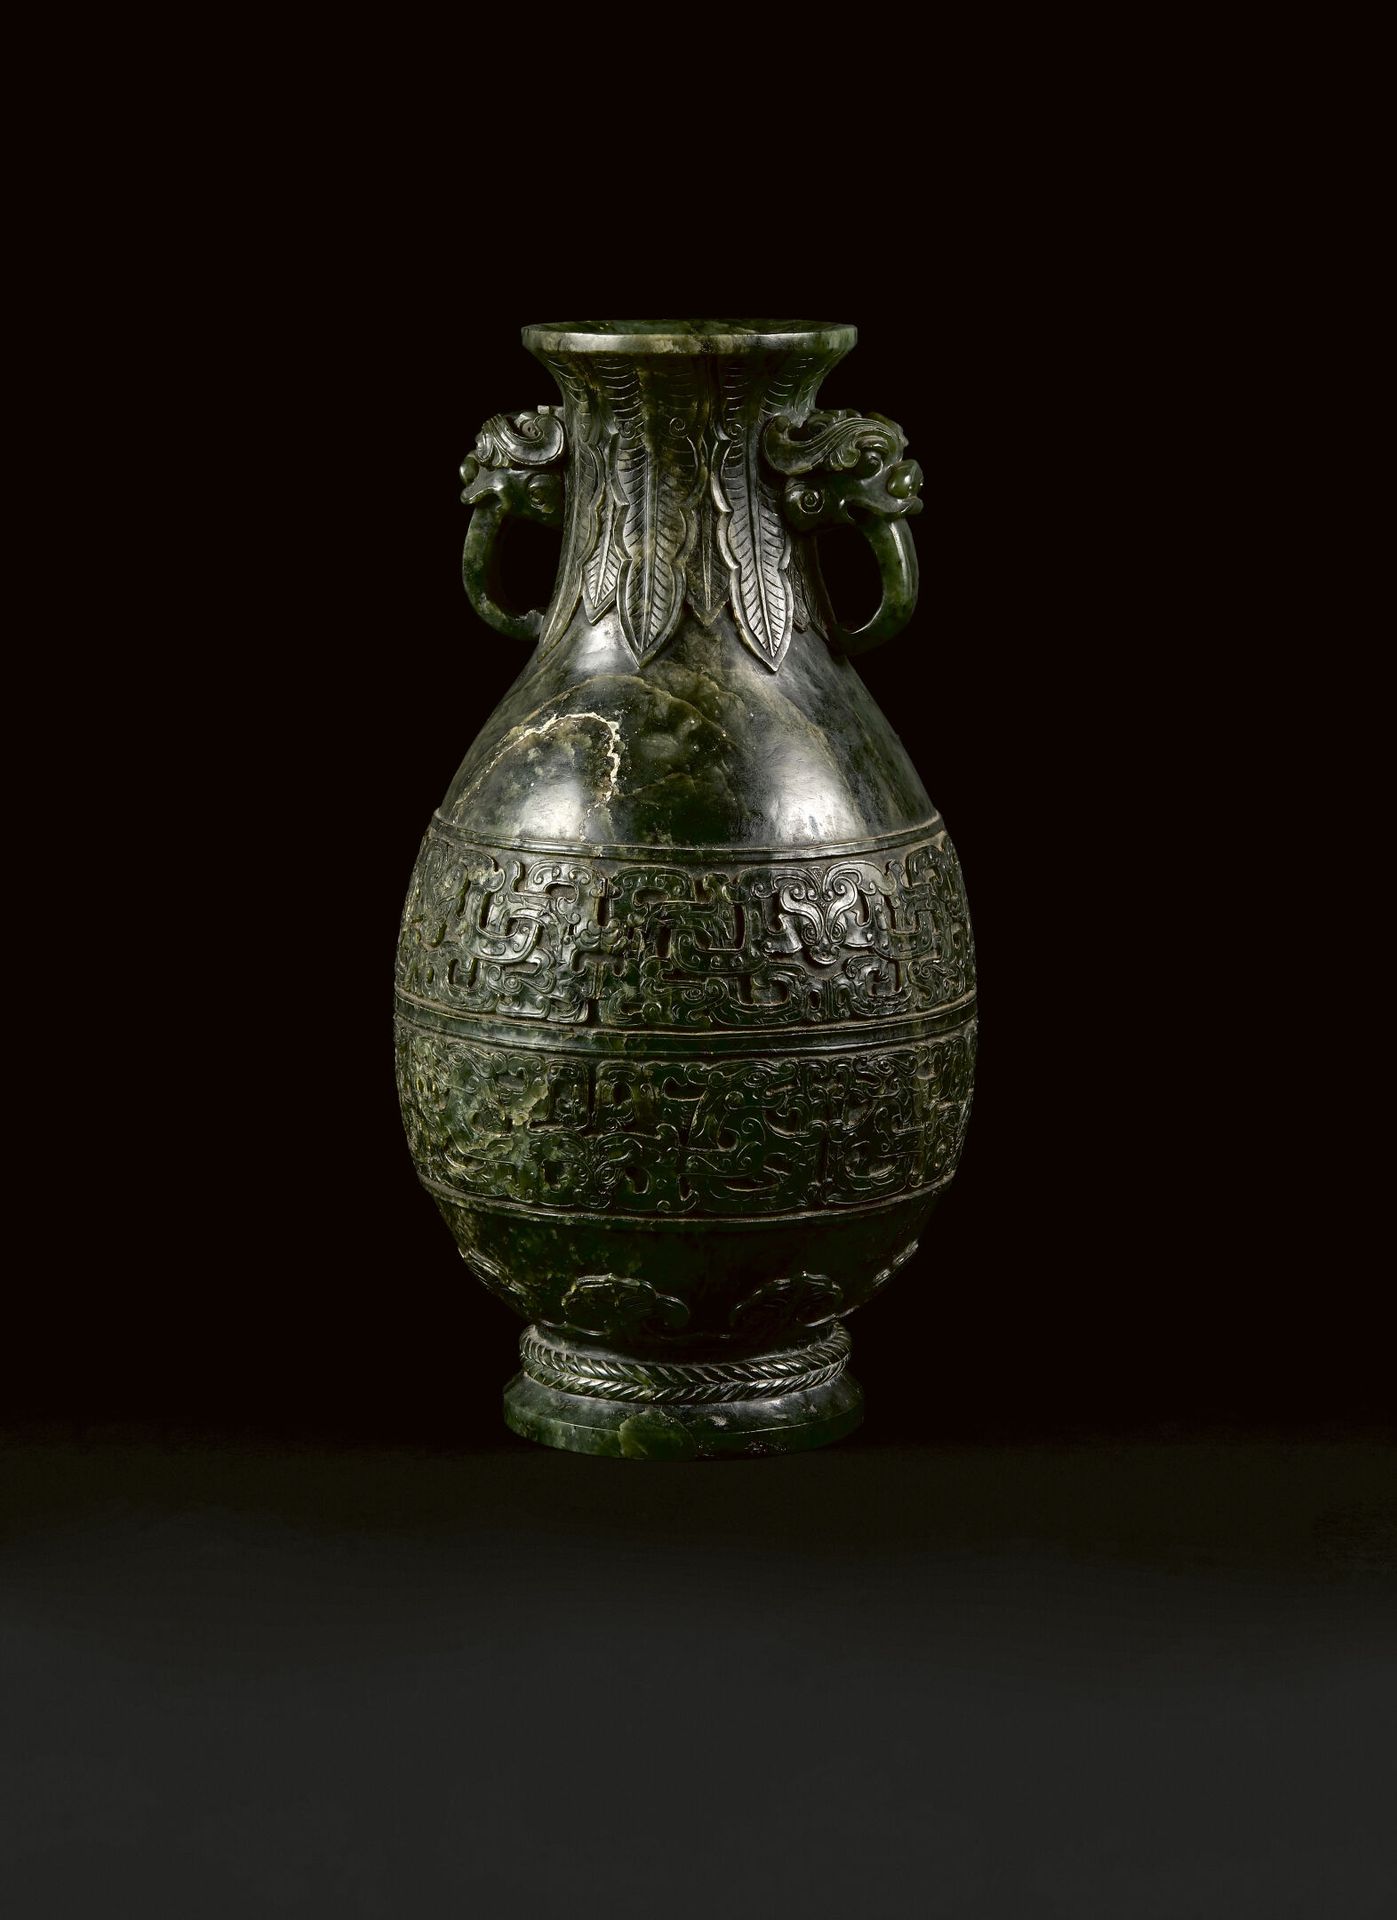 Null CHINA - 18th century
Vase with a rounded body and a slightly flared neck in&hellip;